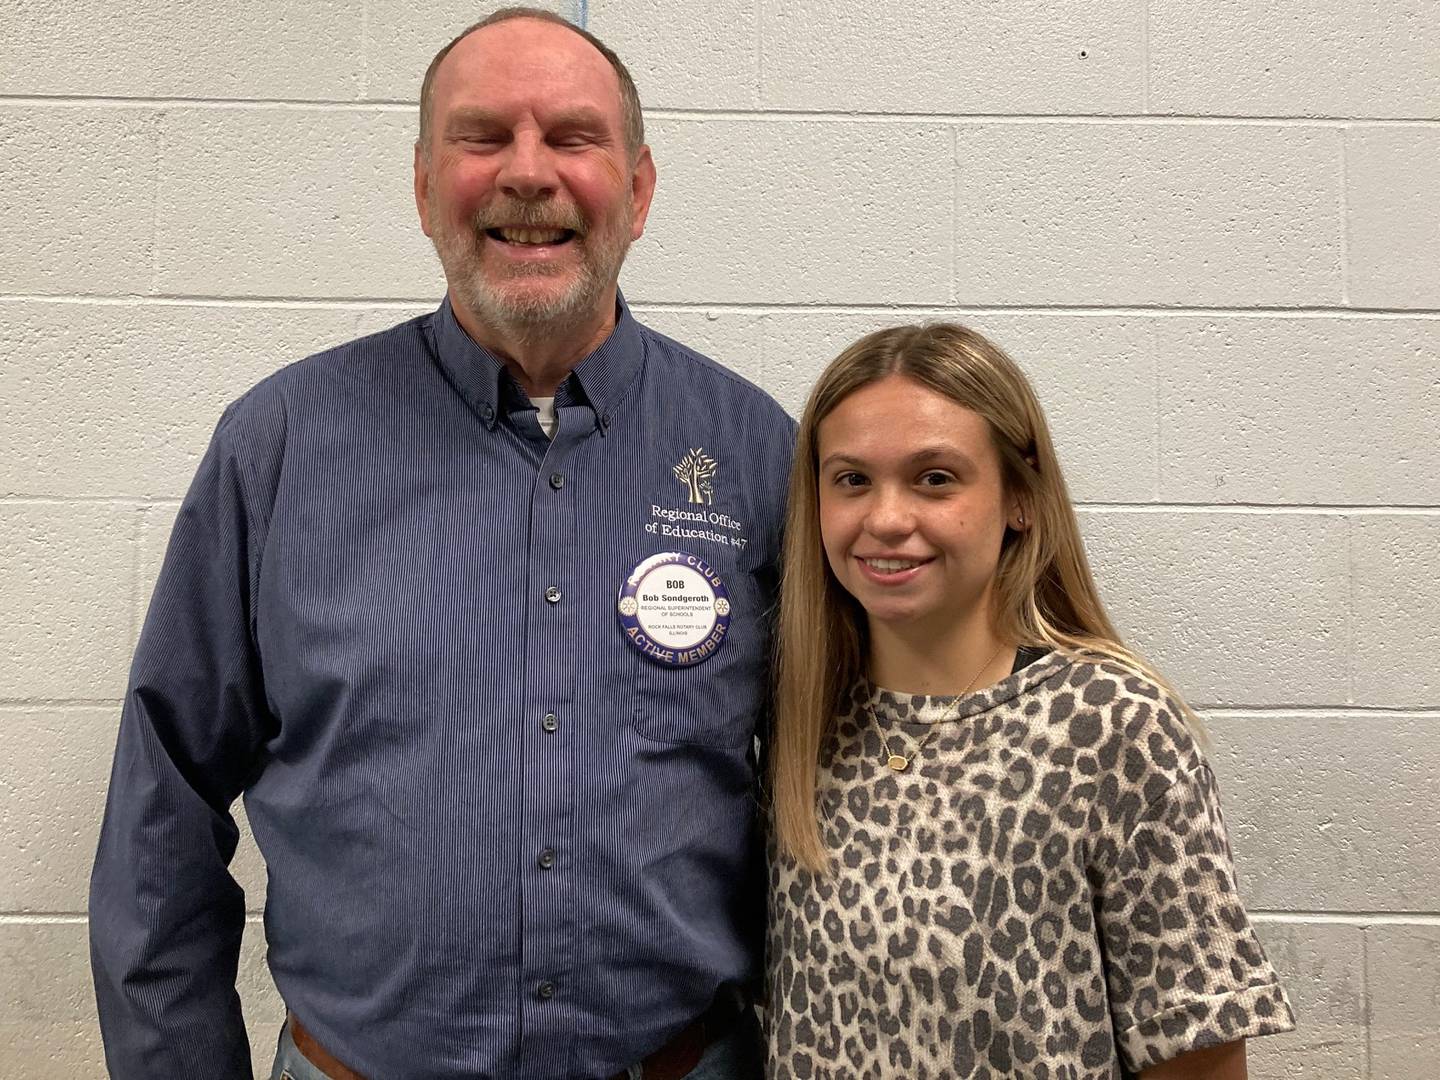 Rock Falls Rotary Youth Committee Chair Bob Sondgeroth, chairman of the Rock Falls rotary youth committee, welcomes Lauren Tupper to its monthly meeting. Supper was named April student of the month, as selected by staff members at Rock Falls High School based on the tenants of Rotary.